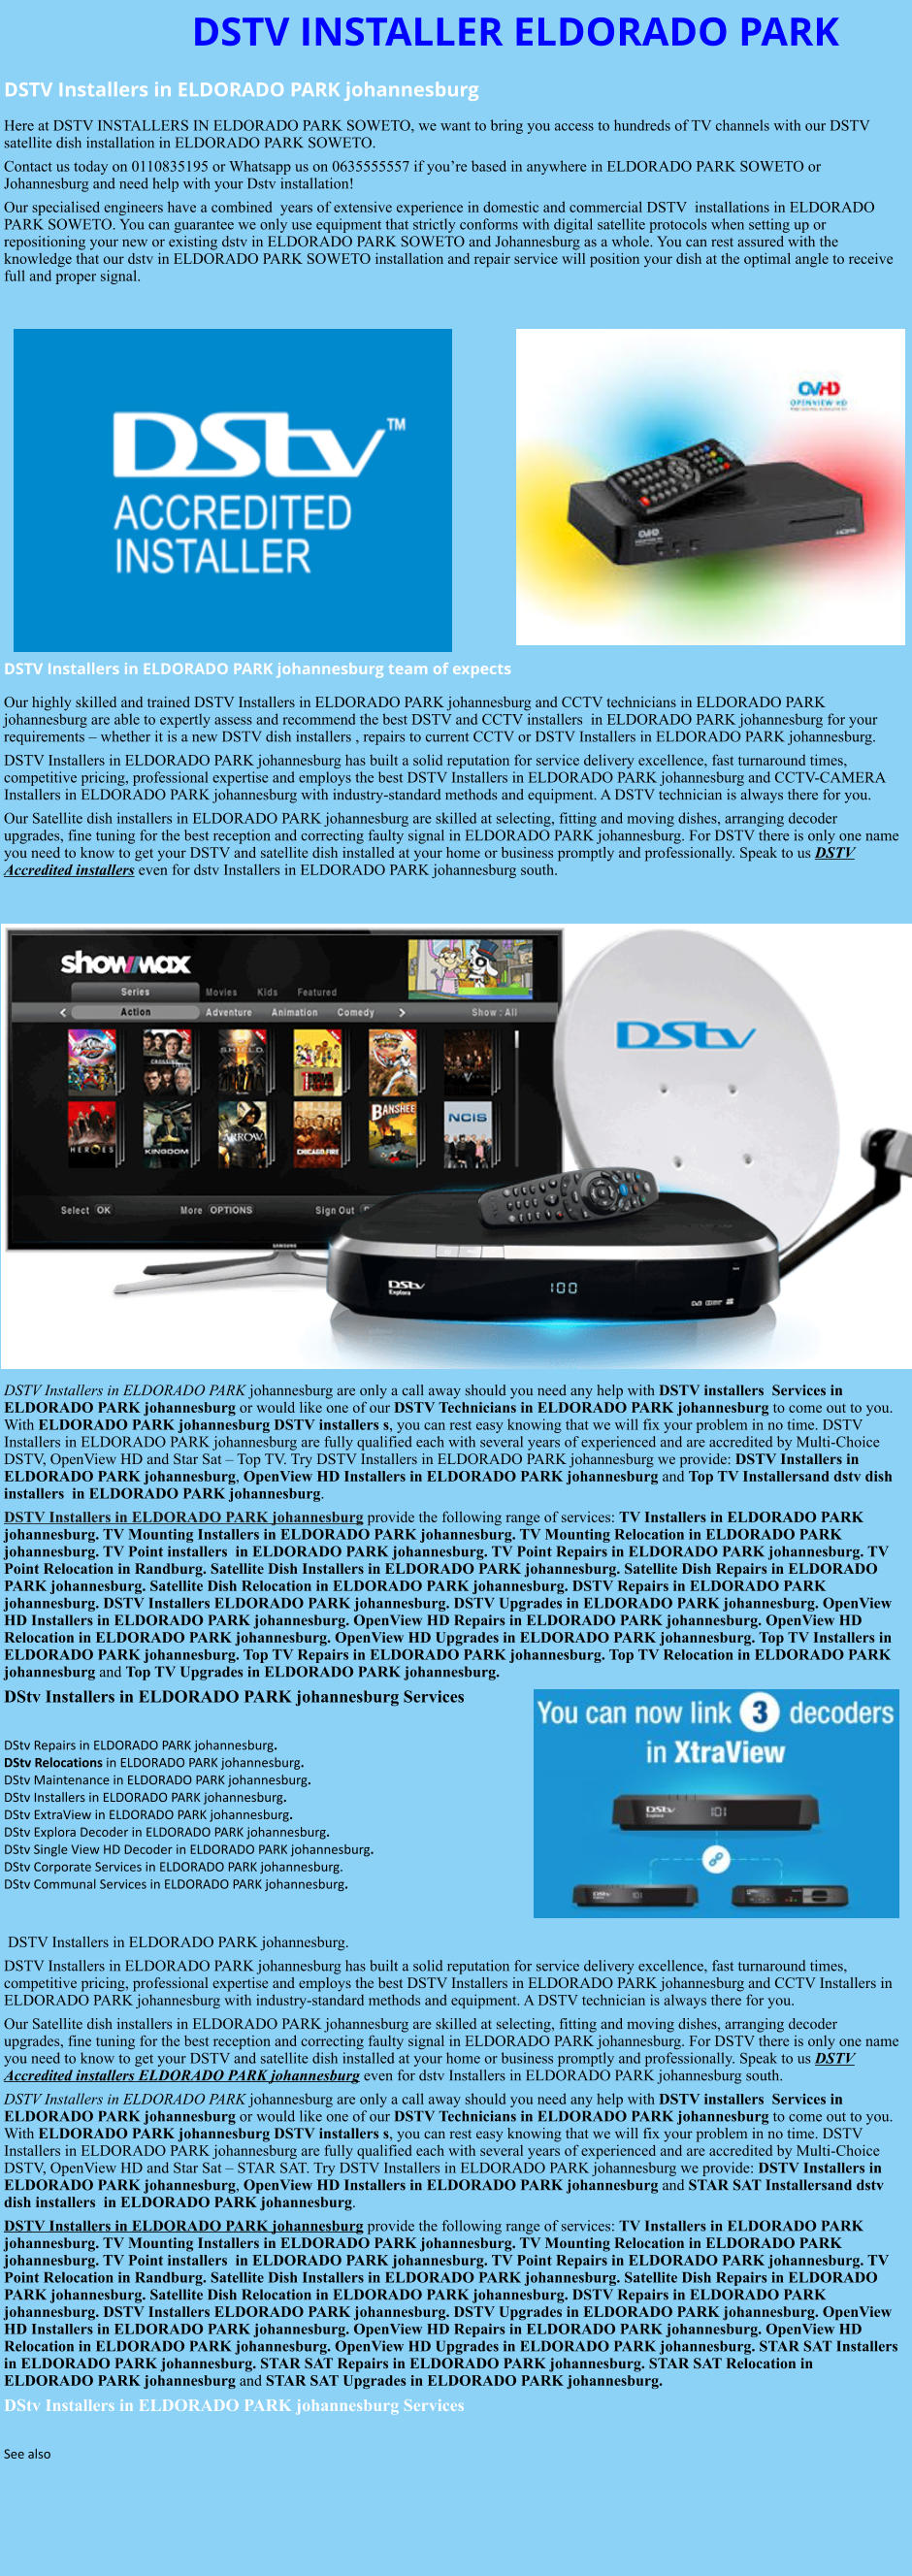 DSTV INSTALLER ELDORADO PARK DSTV Installers in ELDORADO PARK johannesburg  Here at DSTV INSTALLERS IN ELDORADO PARK SOWETO, we want to bring you access to hundreds of TV channels with our DSTV satellite dish installation in ELDORADO PARK SOWETO. Contact us today on 0110835195 or Whatsapp us on 0635555557 if you’re based in anywhere in ELDORADO PARK SOWETO or Johannesburg and need help with your Dstv installation! Our specialised engineers have a combined  years of extensive experience in domestic and commercial DSTV  installations in ELDORADO PARK SOWETO. You can guarantee we only use equipment that strictly conforms with digital satellite protocols when setting up or repositioning your new or existing dstv in ELDORADO PARK SOWETO and Johannesburg as a whole. You can rest assured with the knowledge that our dstv in ELDORADO PARK SOWETO installation and repair service will position your dish at the optimal angle to receive full and proper signal.                DSTV Installers in ELDORADO PARK johannesburg team of expects Our highly skilled and trained DSTV Installers in ELDORADO PARK johannesburg and CCTV technicians in ELDORADO PARK johannesburg are able to expertly assess and recommend the best DSTV and CCTV installers  in ELDORADO PARK johannesburg for your requirements – whether it is a new DSTV dish installers , repairs to current CCTV or DSTV Installers in ELDORADO PARK johannesburg. DSTV Installers in ELDORADO PARK johannesburg has built a solid reputation for service delivery excellence, fast turnaround times, competitive pricing, professional expertise and employs the best DSTV Installers in ELDORADO PARK johannesburg and CCTV-CAMERA Installers in ELDORADO PARK johannesburg with industry-standard methods and equipment. A DSTV technician is always there for you. Our Satellite dish installers in ELDORADO PARK johannesburg are skilled at selecting, fitting and moving dishes, arranging decoder upgrades, fine tuning for the best reception and correcting faulty signal in ELDORADO PARK johannesburg. For DSTV there is only one name you need to know to get your DSTV and satellite dish installed at your home or business promptly and professionally. Speak to us DSTV Accredited installers even for dstv Installers in ELDORADO PARK johannesburg south.                      DSTV Installers in ELDORADO PARK johannesburg are only a call away should you need any help with DSTV installers  Services in ELDORADO PARK johannesburg or would like one of our DSTV Technicians in ELDORADO PARK johannesburg to come out to you. With ELDORADO PARK johannesburg DSTV installers s, you can rest easy knowing that we will fix your problem in no time. DSTV Installers in ELDORADO PARK johannesburg are fully qualified each with several years of experienced and are accredited by Multi-Choice DSTV, OpenView HD and Star Sat – Top TV. Try DSTV Installers in ELDORADO PARK johannesburg we provide: DSTV Installers in ELDORADO PARK johannesburg, OpenView HD Installers in ELDORADO PARK johannesburg and Top TV Installersand dstv dish installers  in ELDORADO PARK johannesburg. DSTV Installers in ELDORADO PARK johannesburg provide the following range of services: TV Installers in ELDORADO PARK johannesburg. TV Mounting Installers in ELDORADO PARK johannesburg. TV Mounting Relocation in ELDORADO PARK johannesburg. TV Point installers  in ELDORADO PARK johannesburg. TV Point Repairs in ELDORADO PARK johannesburg. TV Point Relocation in Randburg. Satellite Dish Installers in ELDORADO PARK johannesburg. Satellite Dish Repairs in ELDORADO PARK johannesburg. Satellite Dish Relocation in ELDORADO PARK johannesburg. DSTV Repairs in ELDORADO PARK johannesburg. DSTV Installers ELDORADO PARK johannesburg. DSTV Upgrades in ELDORADO PARK johannesburg. OpenView HD Installers in ELDORADO PARK johannesburg. OpenView HD Repairs in ELDORADO PARK johannesburg. OpenView HD Relocation in ELDORADO PARK johannesburg. OpenView HD Upgrades in ELDORADO PARK johannesburg. Top TV Installers in ELDORADO PARK johannesburg. Top TV Repairs in ELDORADO PARK johannesburg. Top TV Relocation in ELDORADO PARK johannesburg and Top TV Upgrades in ELDORADO PARK johannesburg. DStv Installers in ELDORADO PARK johannesburg Services  DStv Repairs in ELDORADO PARK johannesburg.  DStv Relocations in ELDORADO PARK johannesburg.  DStv Maintenance in ELDORADO PARK johannesburg. DStv Installers in ELDORADO PARK johannesburg. DStv ExtraView in ELDORADO PARK johannesburg. DStv Explora Decoder in ELDORADO PARK johannesburg. DStv Single View HD Decoder in ELDORADO PARK johannesburg. DStv Corporate Services in ELDORADO PARK johannesburg. DStv Communal Services in ELDORADO PARK johannesburg.    DSTV Installers in ELDORADO PARK johannesburg. DSTV Installers in ELDORADO PARK johannesburg has built a solid reputation for service delivery excellence, fast turnaround times, competitive pricing, professional expertise and employs the best DSTV Installers in ELDORADO PARK johannesburg and CCTV Installers in ELDORADO PARK johannesburg with industry-standard methods and equipment. A DSTV technician is always there for you. Our Satellite dish installers in ELDORADO PARK johannesburg are skilled at selecting, fitting and moving dishes, arranging decoder upgrades, fine tuning for the best reception and correcting faulty signal in ELDORADO PARK johannesburg. For DSTV there is only one name you need to know to get your DSTV and satellite dish installed at your home or business promptly and professionally. Speak to us DSTV Accredited installers ELDORADO PARK johannesburg even for dstv Installers in ELDORADO PARK johannesburg south. DSTV Installers in ELDORADO PARK johannesburg are only a call away should you need any help with DSTV installers  Services in ELDORADO PARK johannesburg or would like one of our DSTV Technicians in ELDORADO PARK johannesburg to come out to you. With ELDORADO PARK johannesburg DSTV installers s, you can rest easy knowing that we will fix your problem in no time. DSTV Installers in ELDORADO PARK johannesburg are fully qualified each with several years of experienced and are accredited by Multi-Choice DSTV, OpenView HD and Star Sat – STAR SAT. Try DSTV Installers in ELDORADO PARK johannesburg we provide: DSTV Installers in ELDORADO PARK johannesburg, OpenView HD Installers in ELDORADO PARK johannesburg and STAR SAT Installersand dstv dish installers  in ELDORADO PARK johannesburg. DSTV Installers in ELDORADO PARK johannesburg provide the following range of services: TV Installers in ELDORADO PARK johannesburg. TV Mounting Installers in ELDORADO PARK johannesburg. TV Mounting Relocation in ELDORADO PARK johannesburg. TV Point installers  in ELDORADO PARK johannesburg. TV Point Repairs in ELDORADO PARK johannesburg. TV Point Relocation in Randburg. Satellite Dish Installers in ELDORADO PARK johannesburg. Satellite Dish Repairs in ELDORADO PARK johannesburg. Satellite Dish Relocation in ELDORADO PARK johannesburg. DSTV Repairs in ELDORADO PARK johannesburg. DSTV Installers ELDORADO PARK johannesburg. DSTV Upgrades in ELDORADO PARK johannesburg. OpenView HD Installers in ELDORADO PARK johannesburg. OpenView HD Repairs in ELDORADO PARK johannesburg. OpenView HD Relocation in ELDORADO PARK johannesburg. OpenView HD Upgrades in ELDORADO PARK johannesburg. STAR SAT Installers in ELDORADO PARK johannesburg. STAR SAT Repairs in ELDORADO PARK johannesburg. STAR SAT Relocation in ELDORADO PARK johannesburg and STAR SAT Upgrades in ELDORADO PARK johannesburg. DStv Installers in ELDORADO PARK johannesburg Services  See also